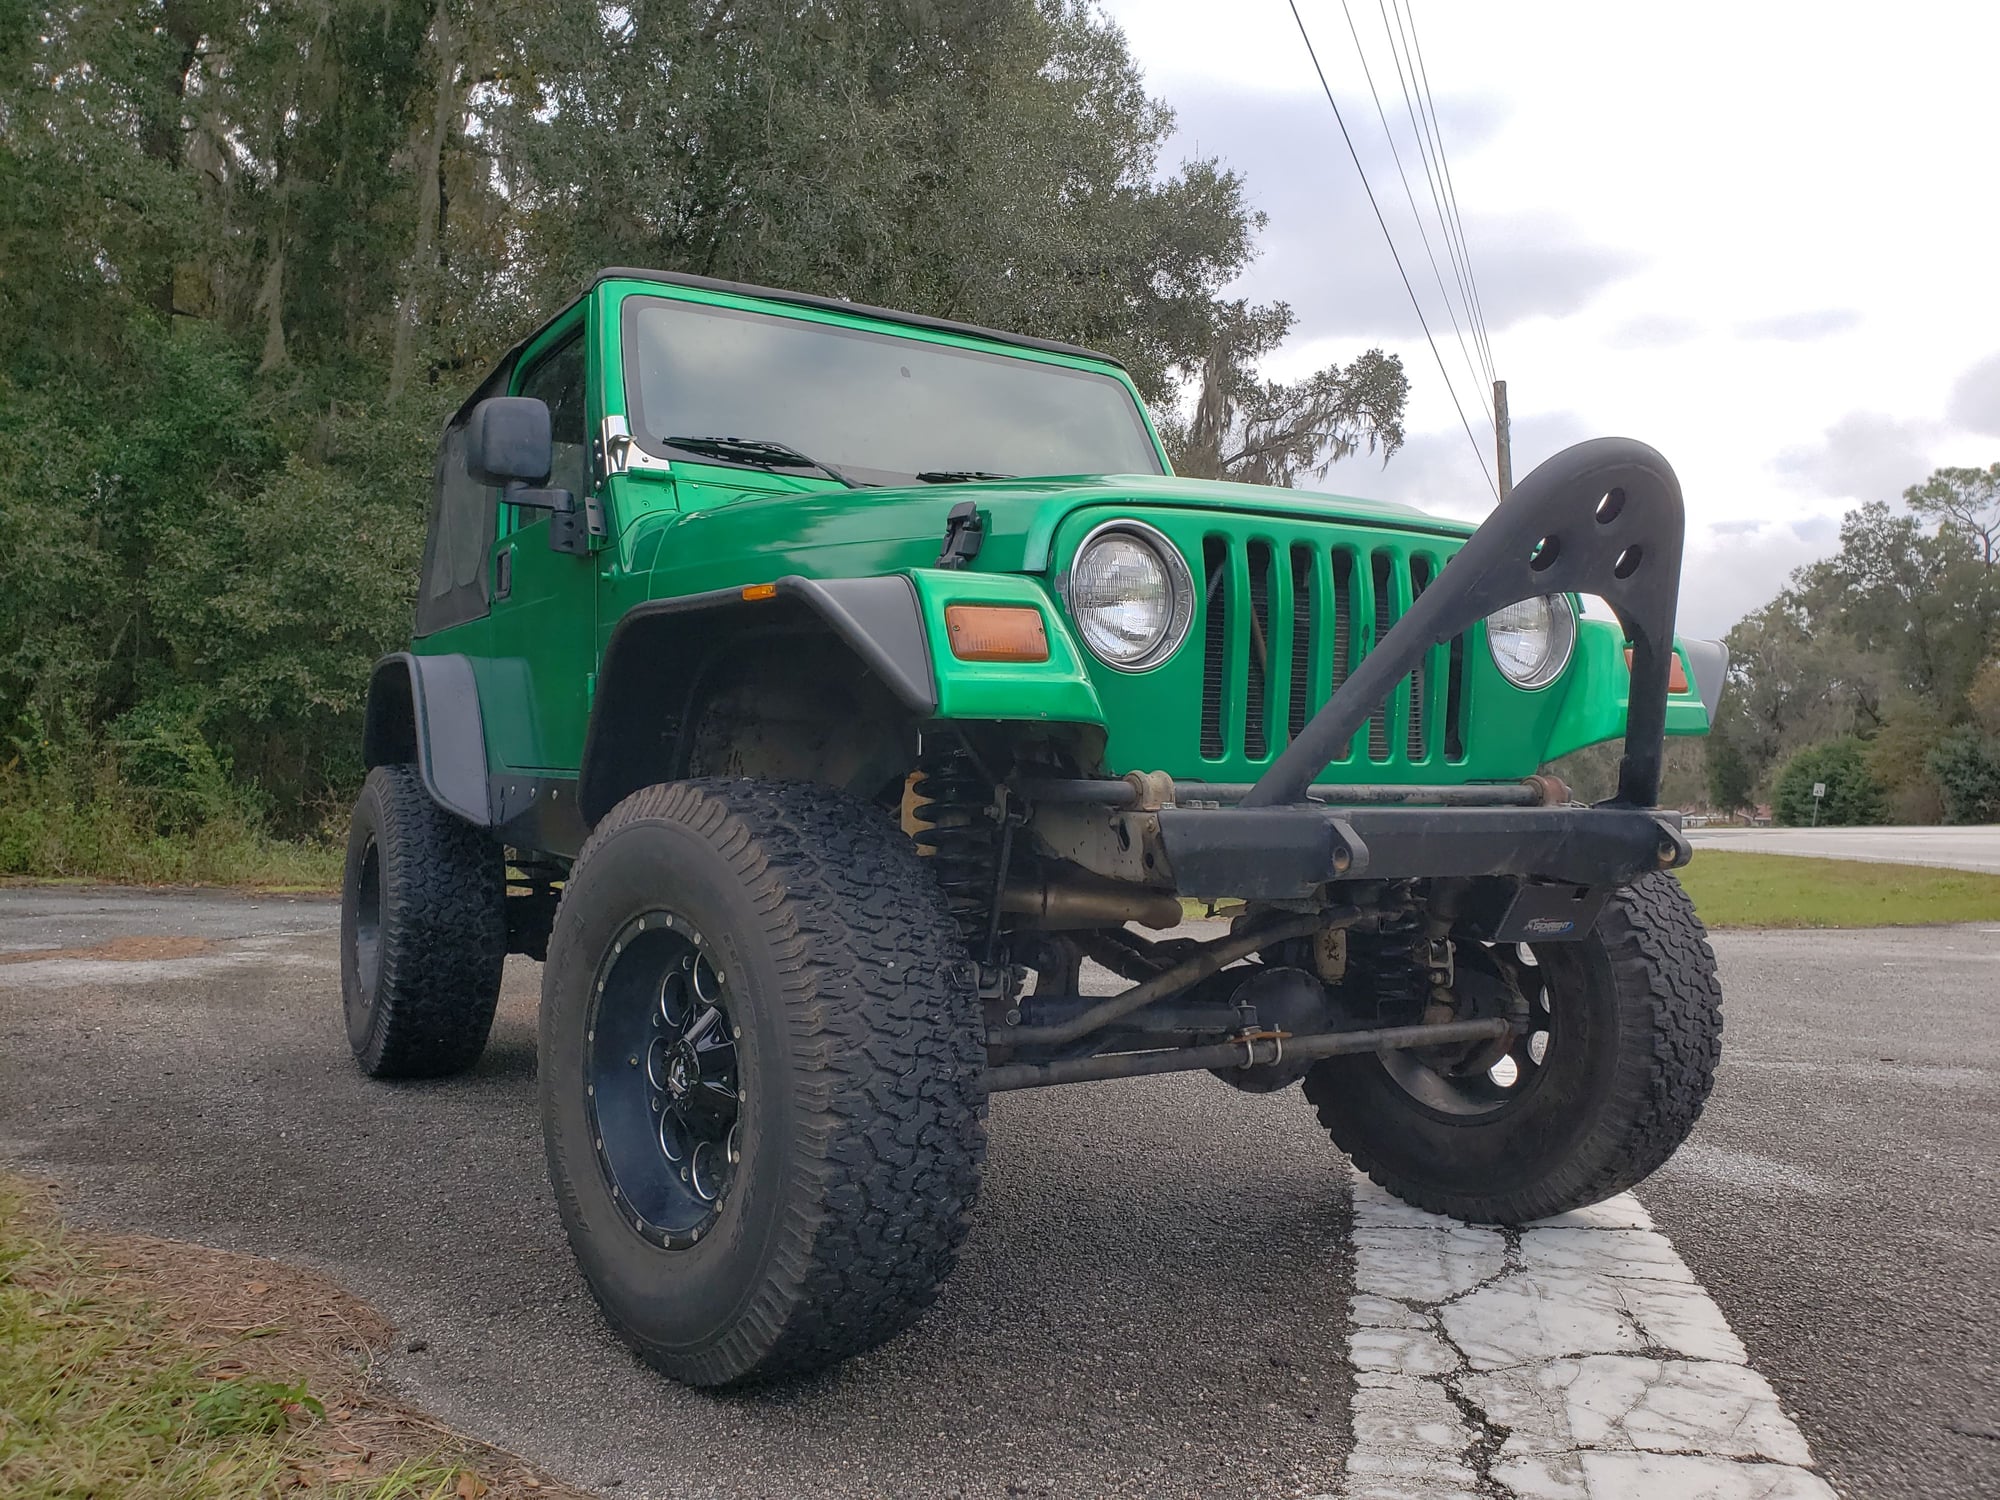 1999 Jeep TJ - 1999 Jeep Wrangler LS1 swapped daily driver - Used - VIN 1j4fy19s6xp431290 - 89,000 Miles - 8 cyl - 4WD - Manual - Other - Ocala, FL 34474, United States